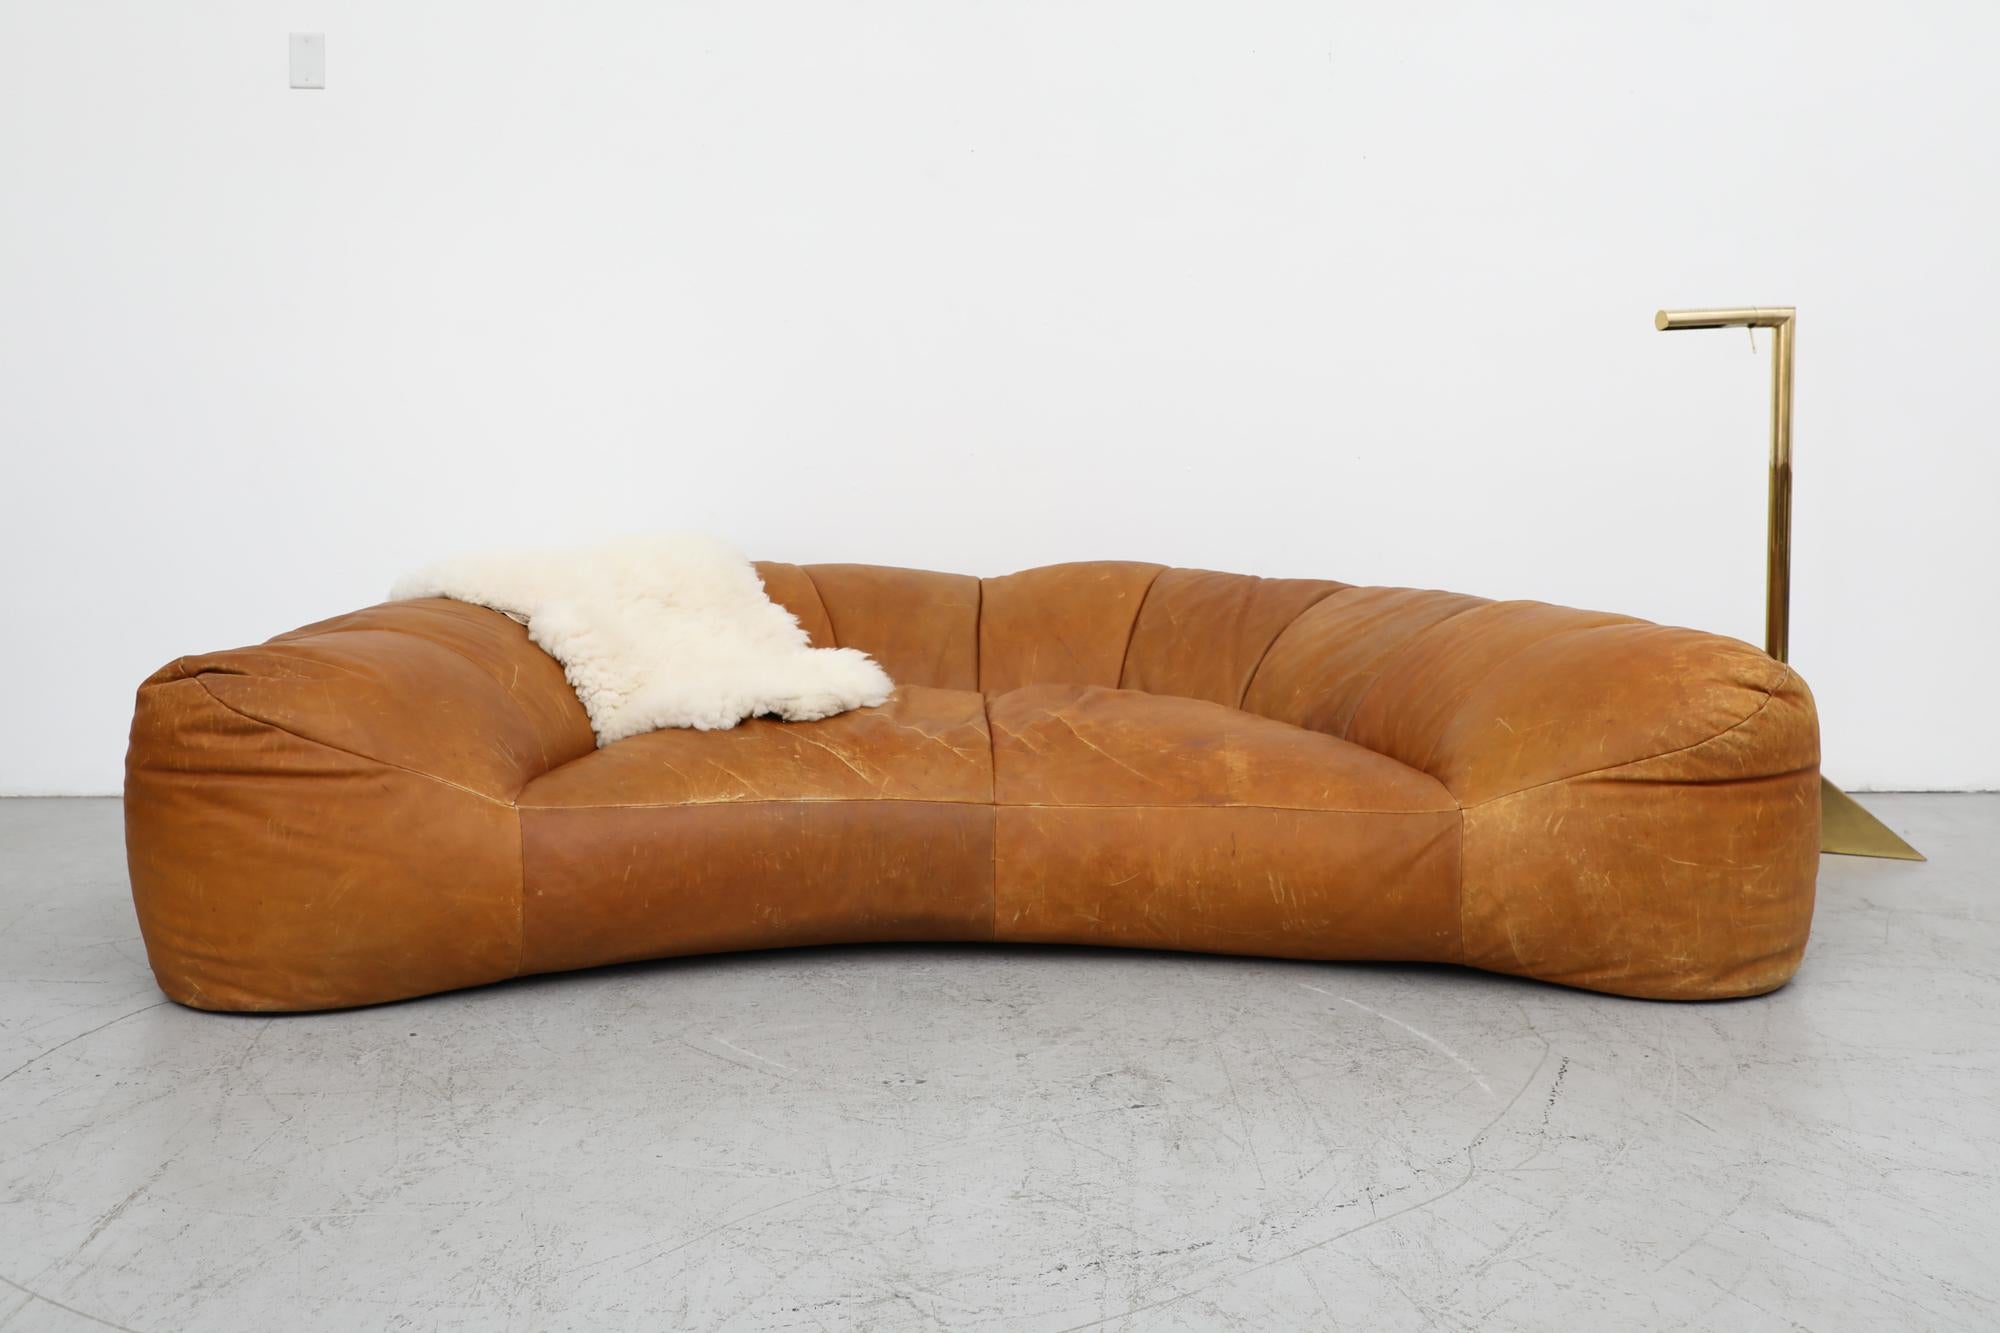 A Mid century, Raphael Raffel designed, 1970's, beautiful cognac leather Croissant Sofa for Honore Paris. Raphael Raffel (1912-2000), who trained at the École des Beaux Arts, was a well-known interior decorator whose work was collected by the likes